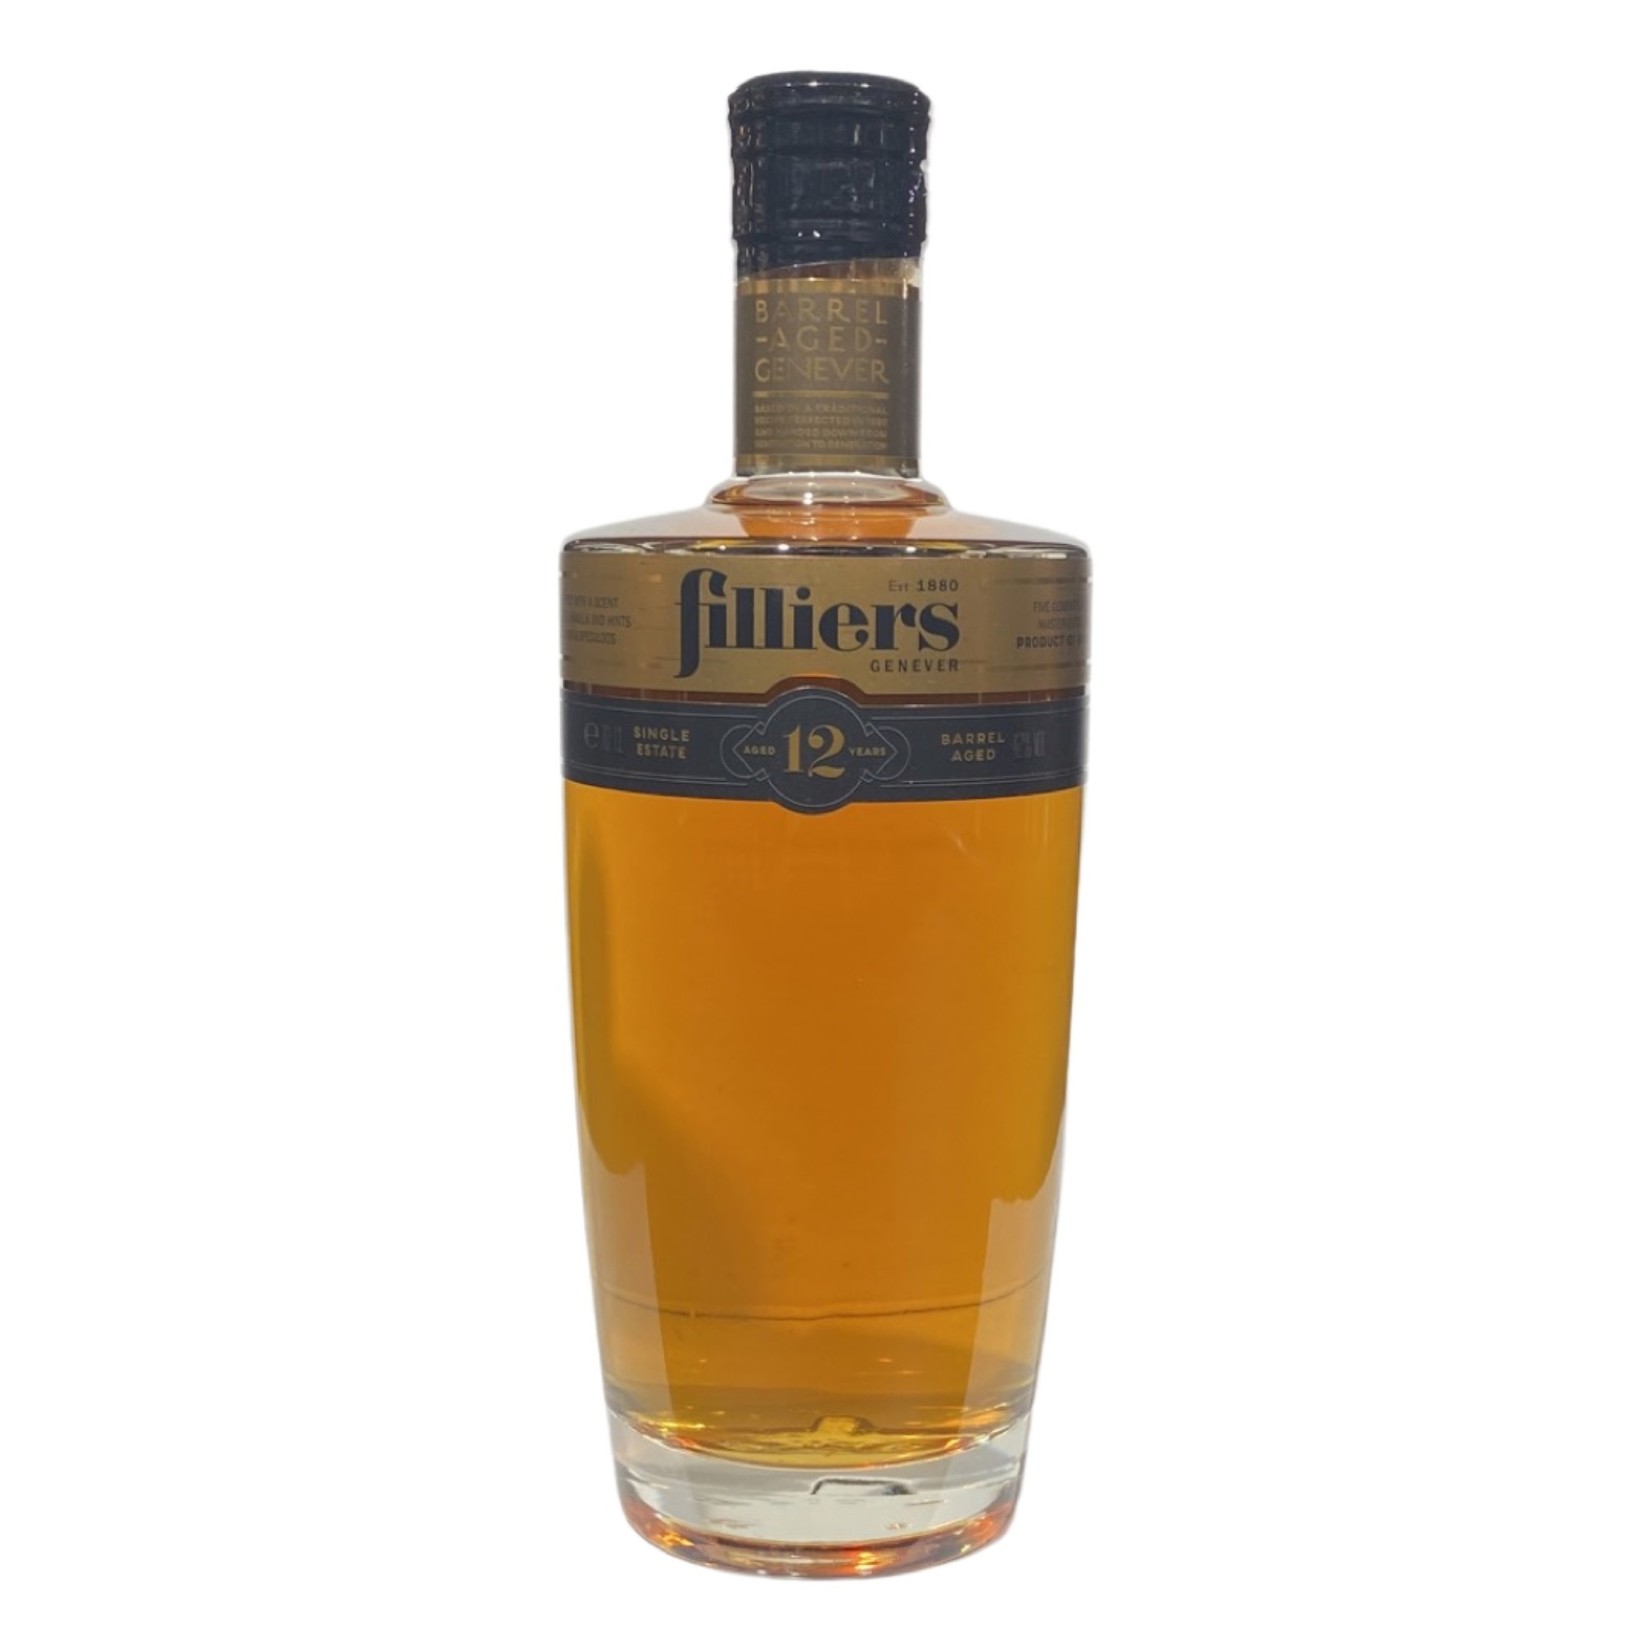 Filliers Genever 12 years 0,7 ltr